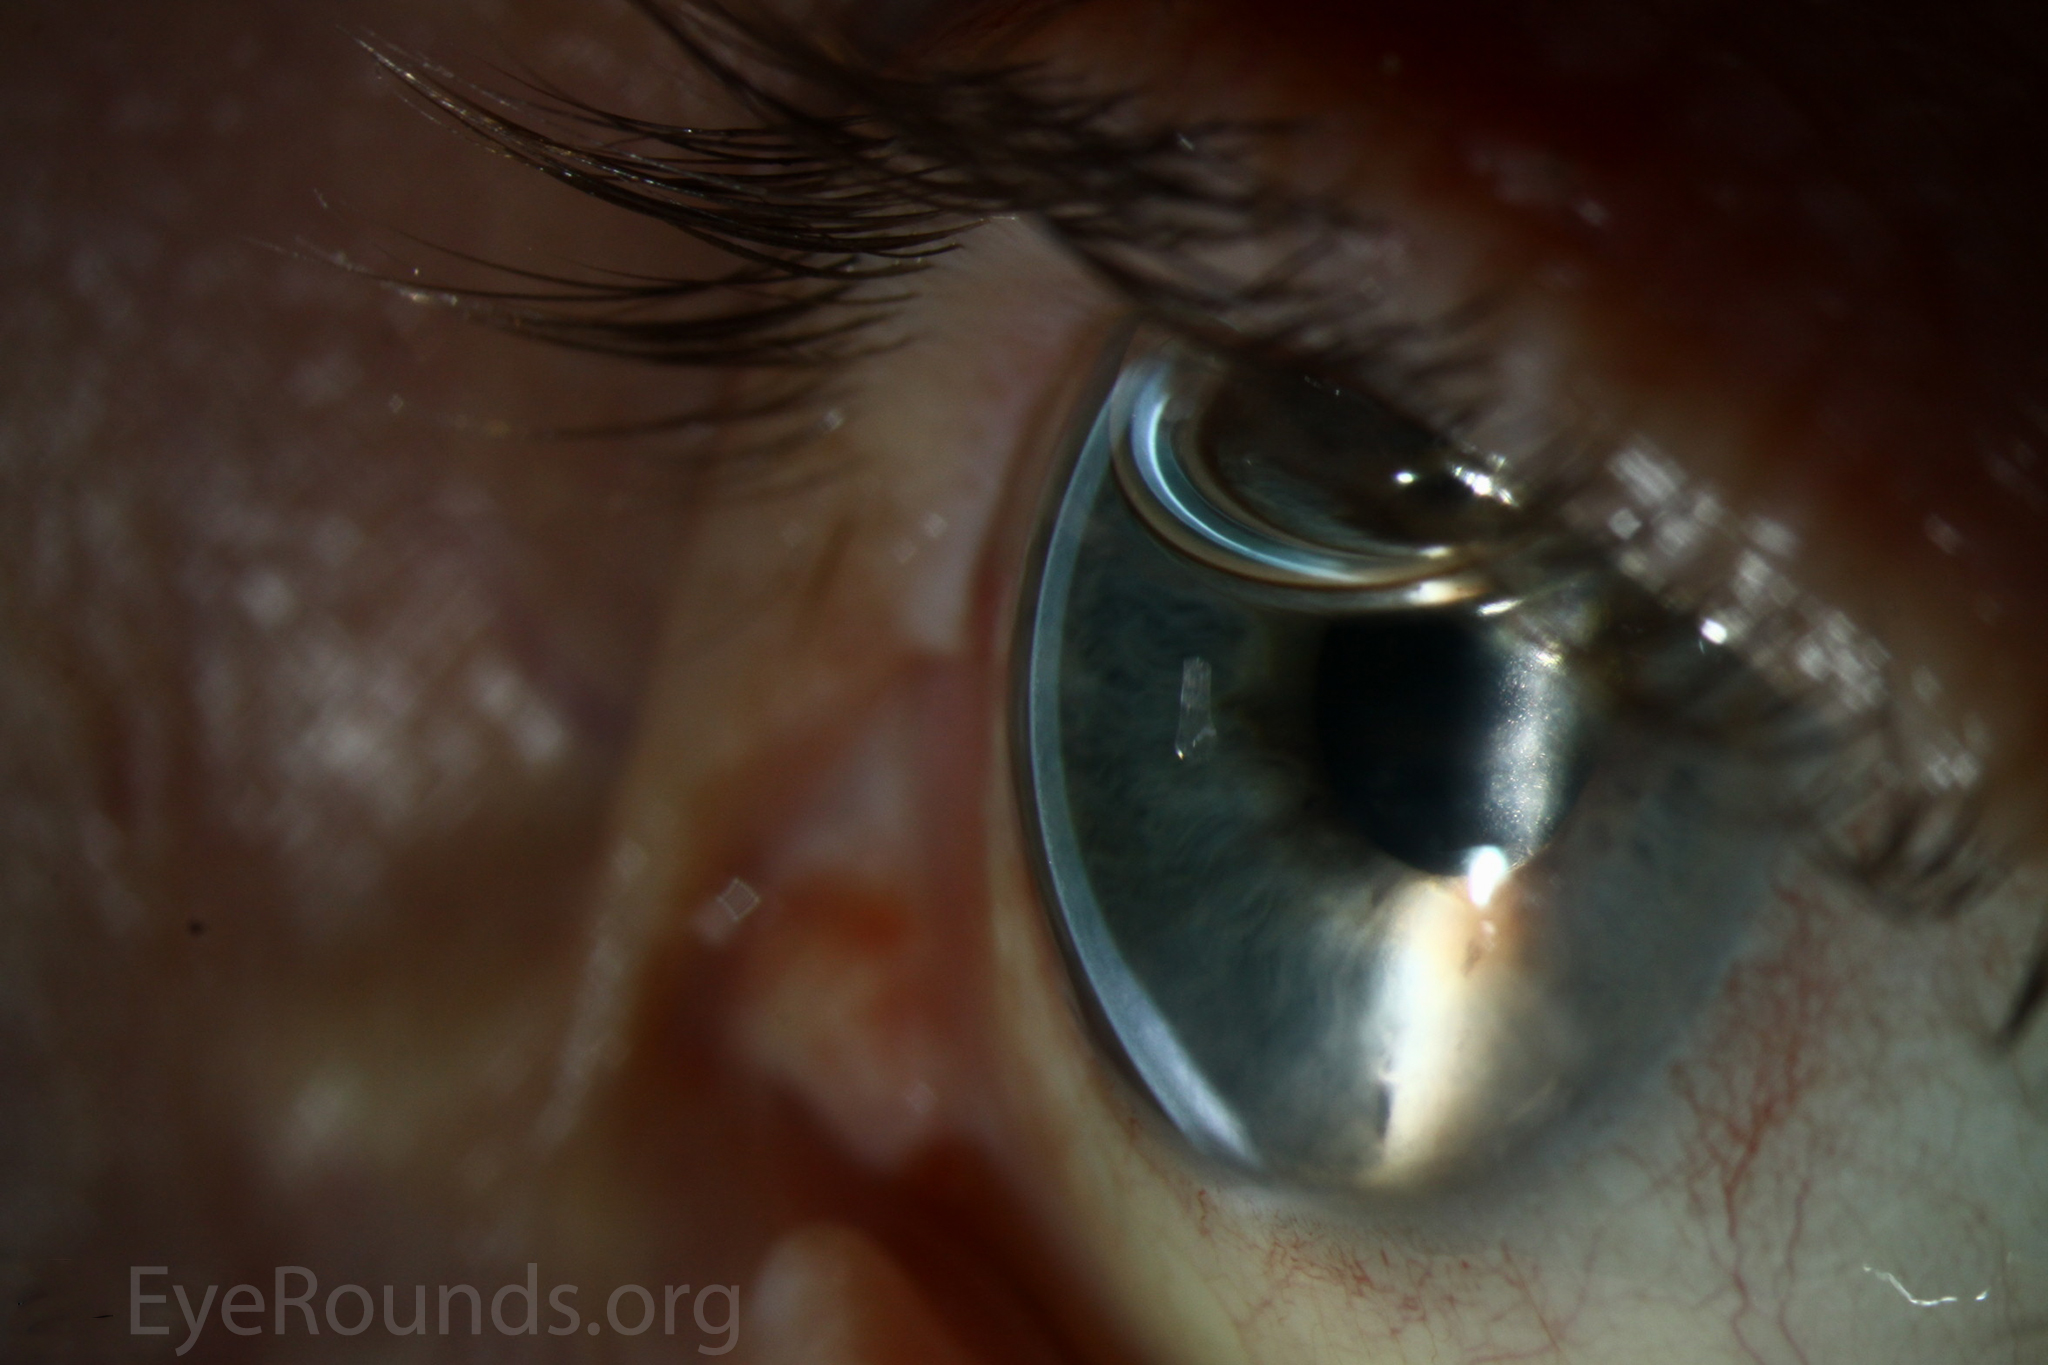 Clear DALK graft 3 years after transplant for keratoconus